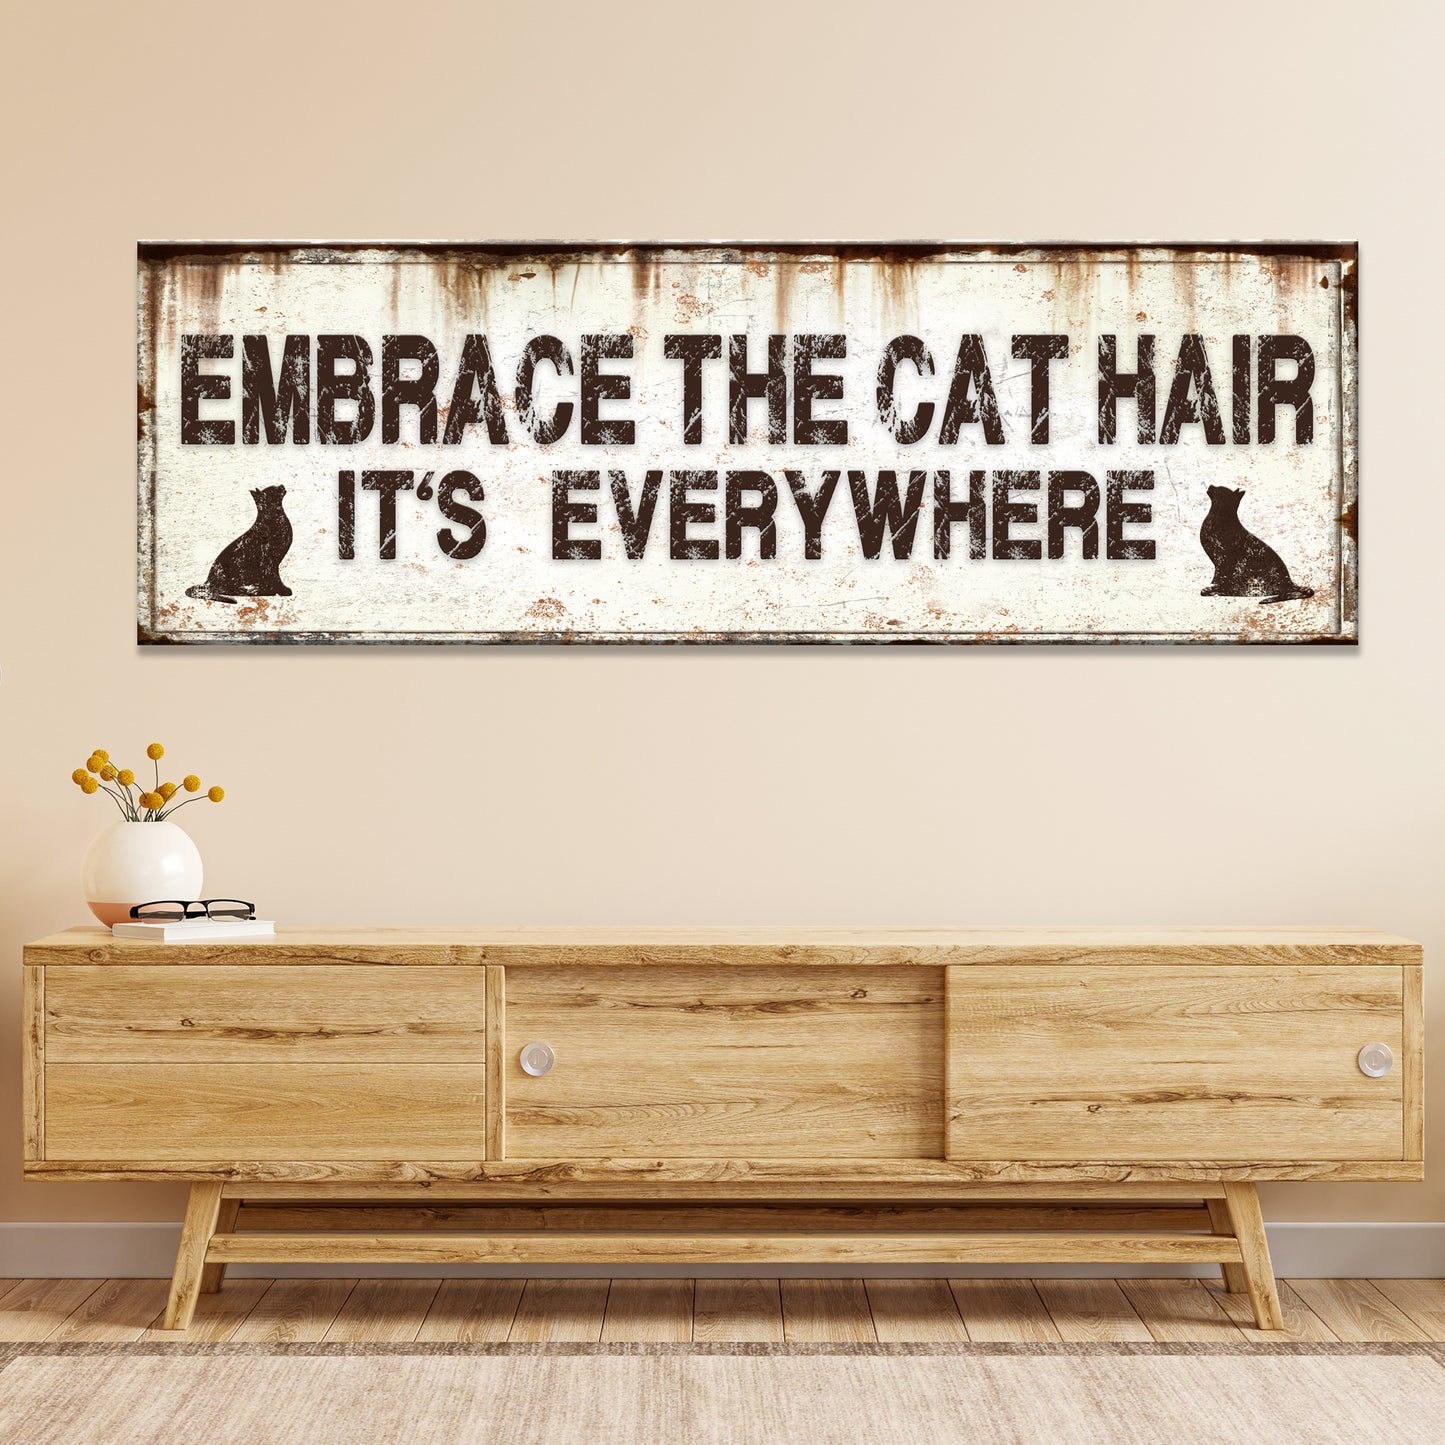 Embrace The Cat Hair It's Everywhere Sign II - Image by Tailored Canvases